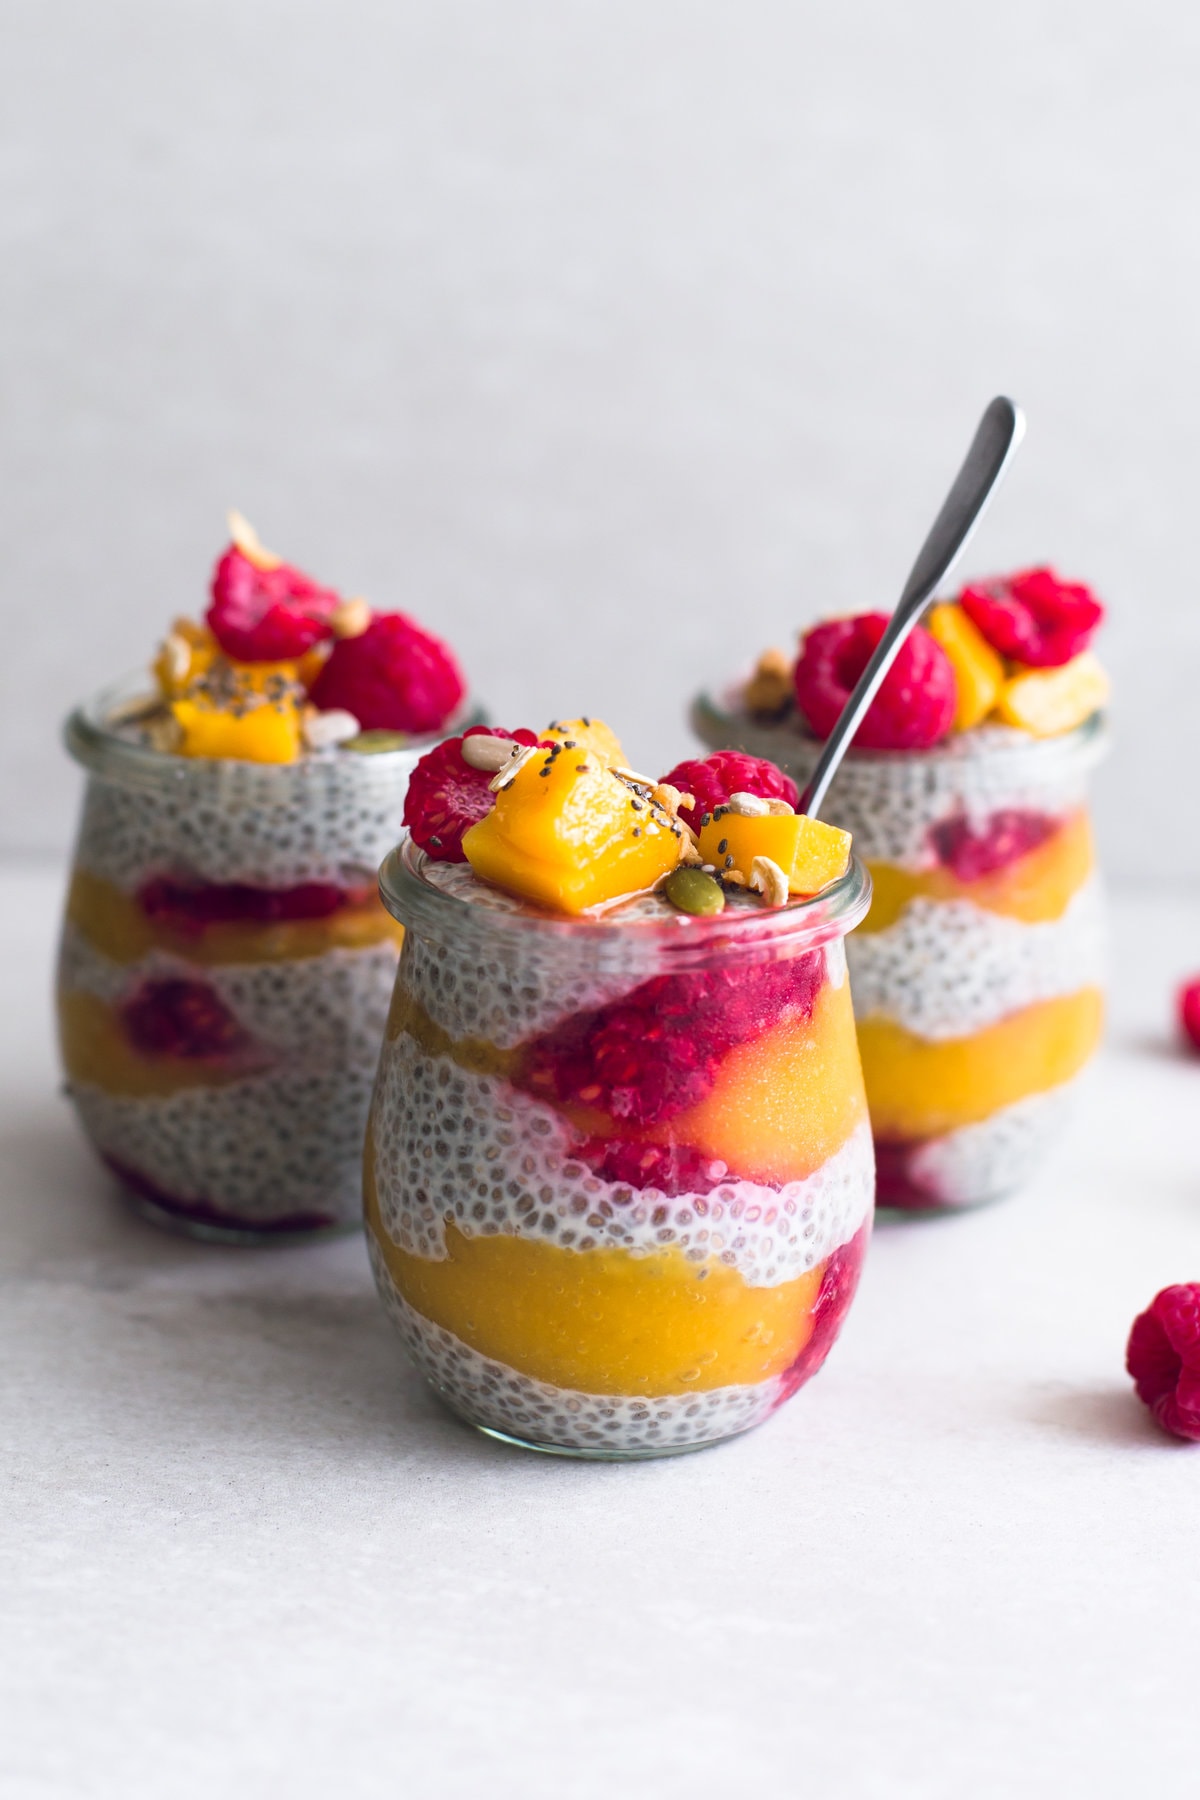 A healthy, fruity and delicious guilt-free Mango Raspberry Chia Seed Pudding. 100% Vegan, Gluten Free and Refined Sugar Free. #mango #raspberry #chia #pudding #refinedsugar #fruit #simple #healthy #breakfast #veganrecipes